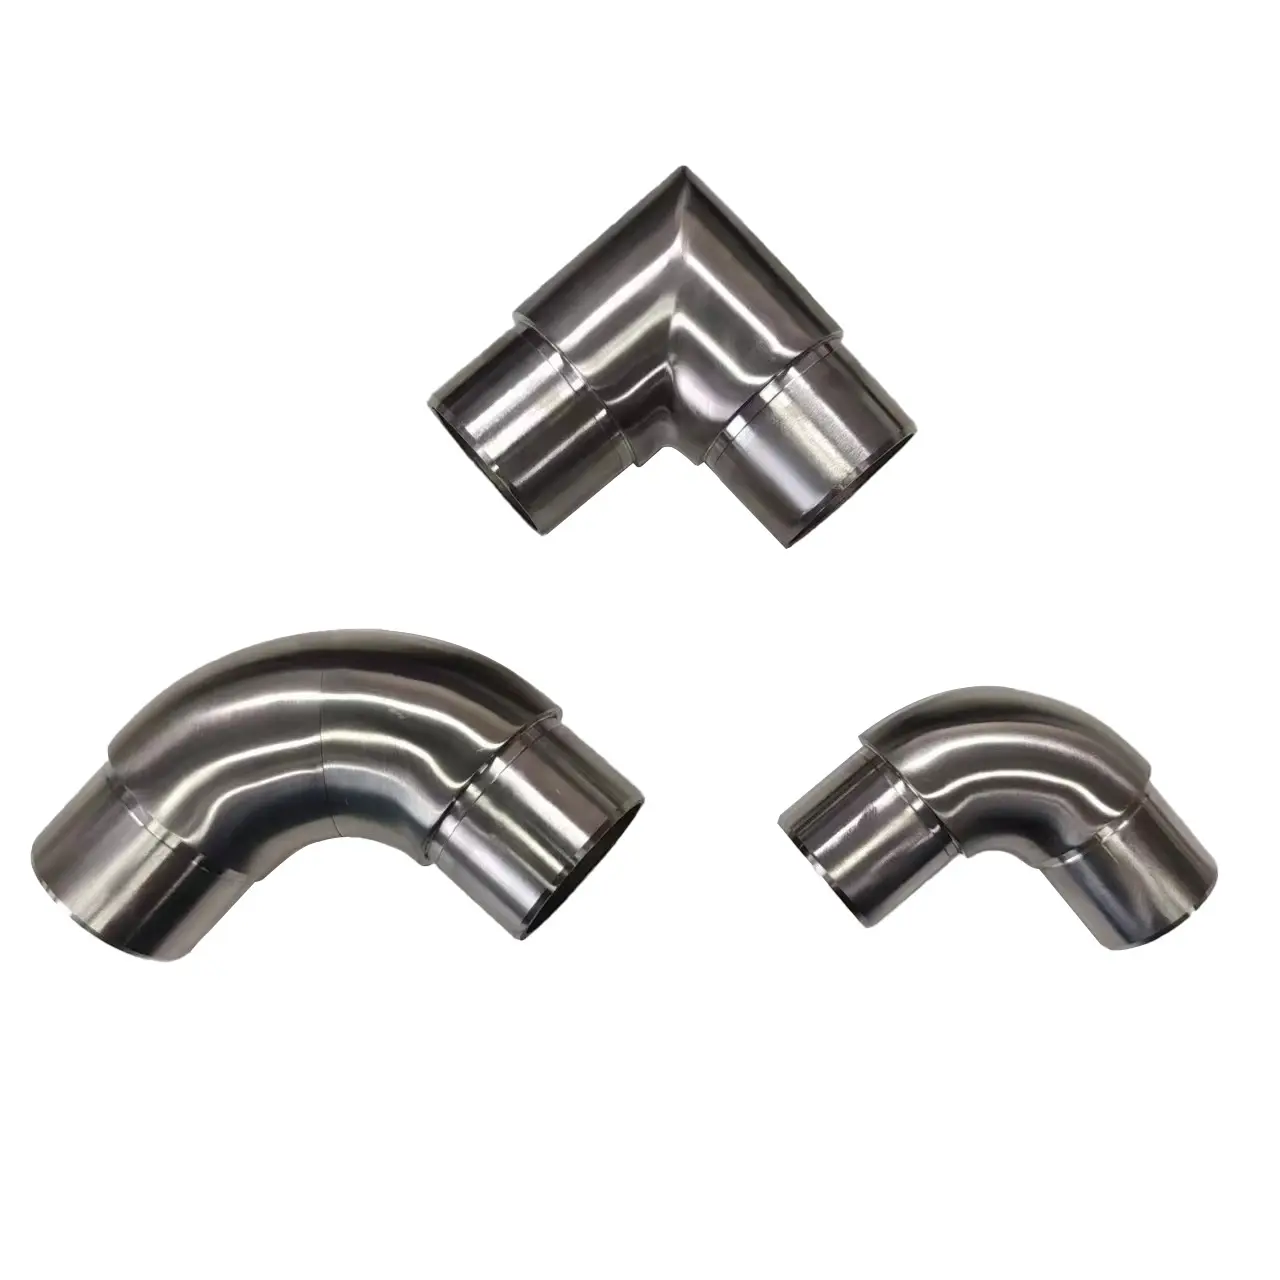 Staircase Balcony Balustrade Railing Systems Fittings Ss 304 316 Handrail Pipe Accessories Die Cast 3 Way Round Tube Connector